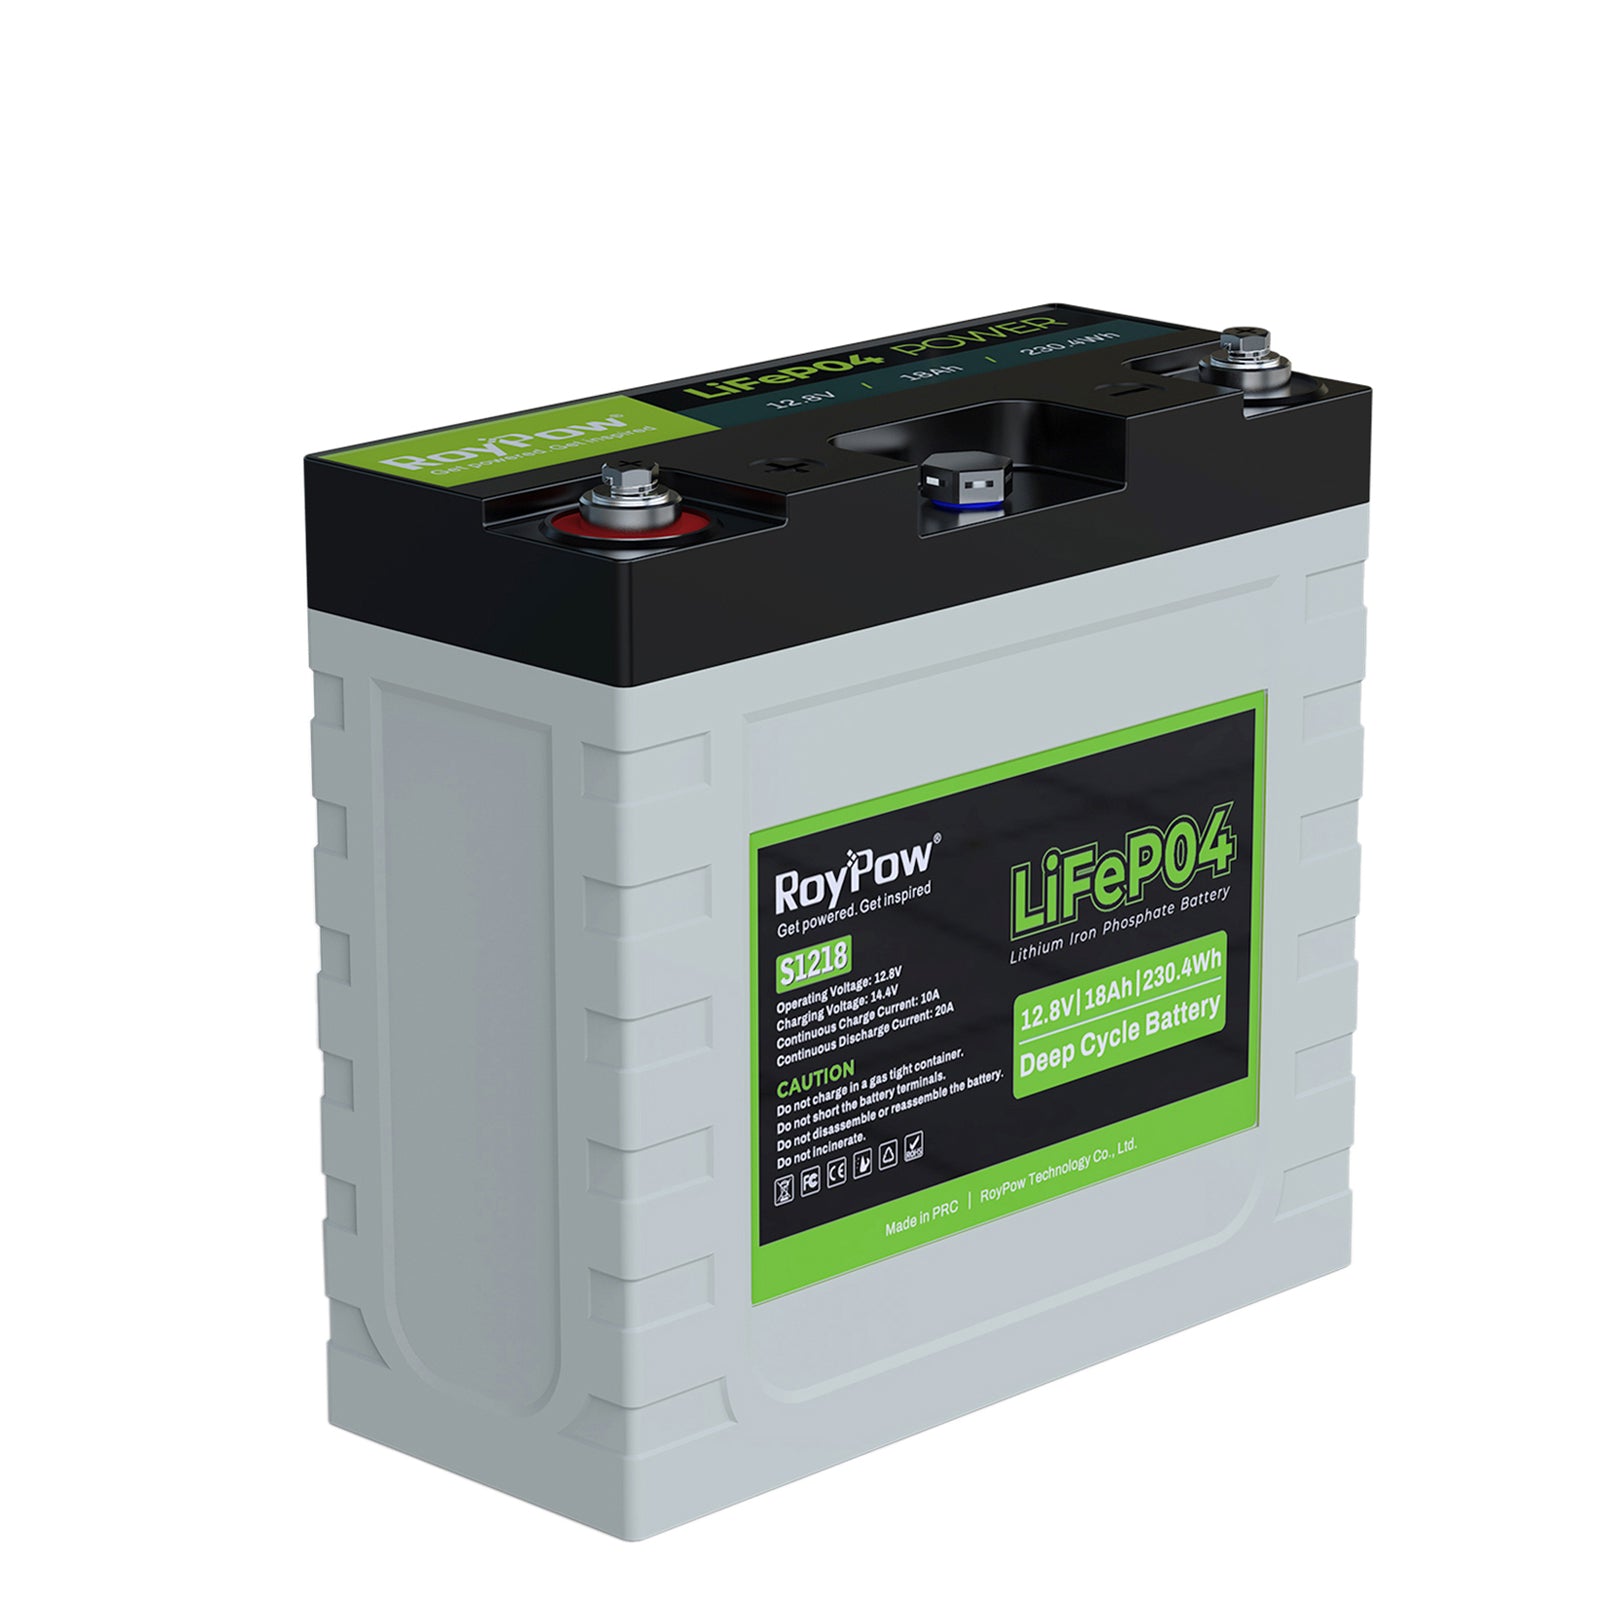 RoyPow 12V 18AH lithium iron phosphate (LiFePO4) deep cycle rechargeable battery